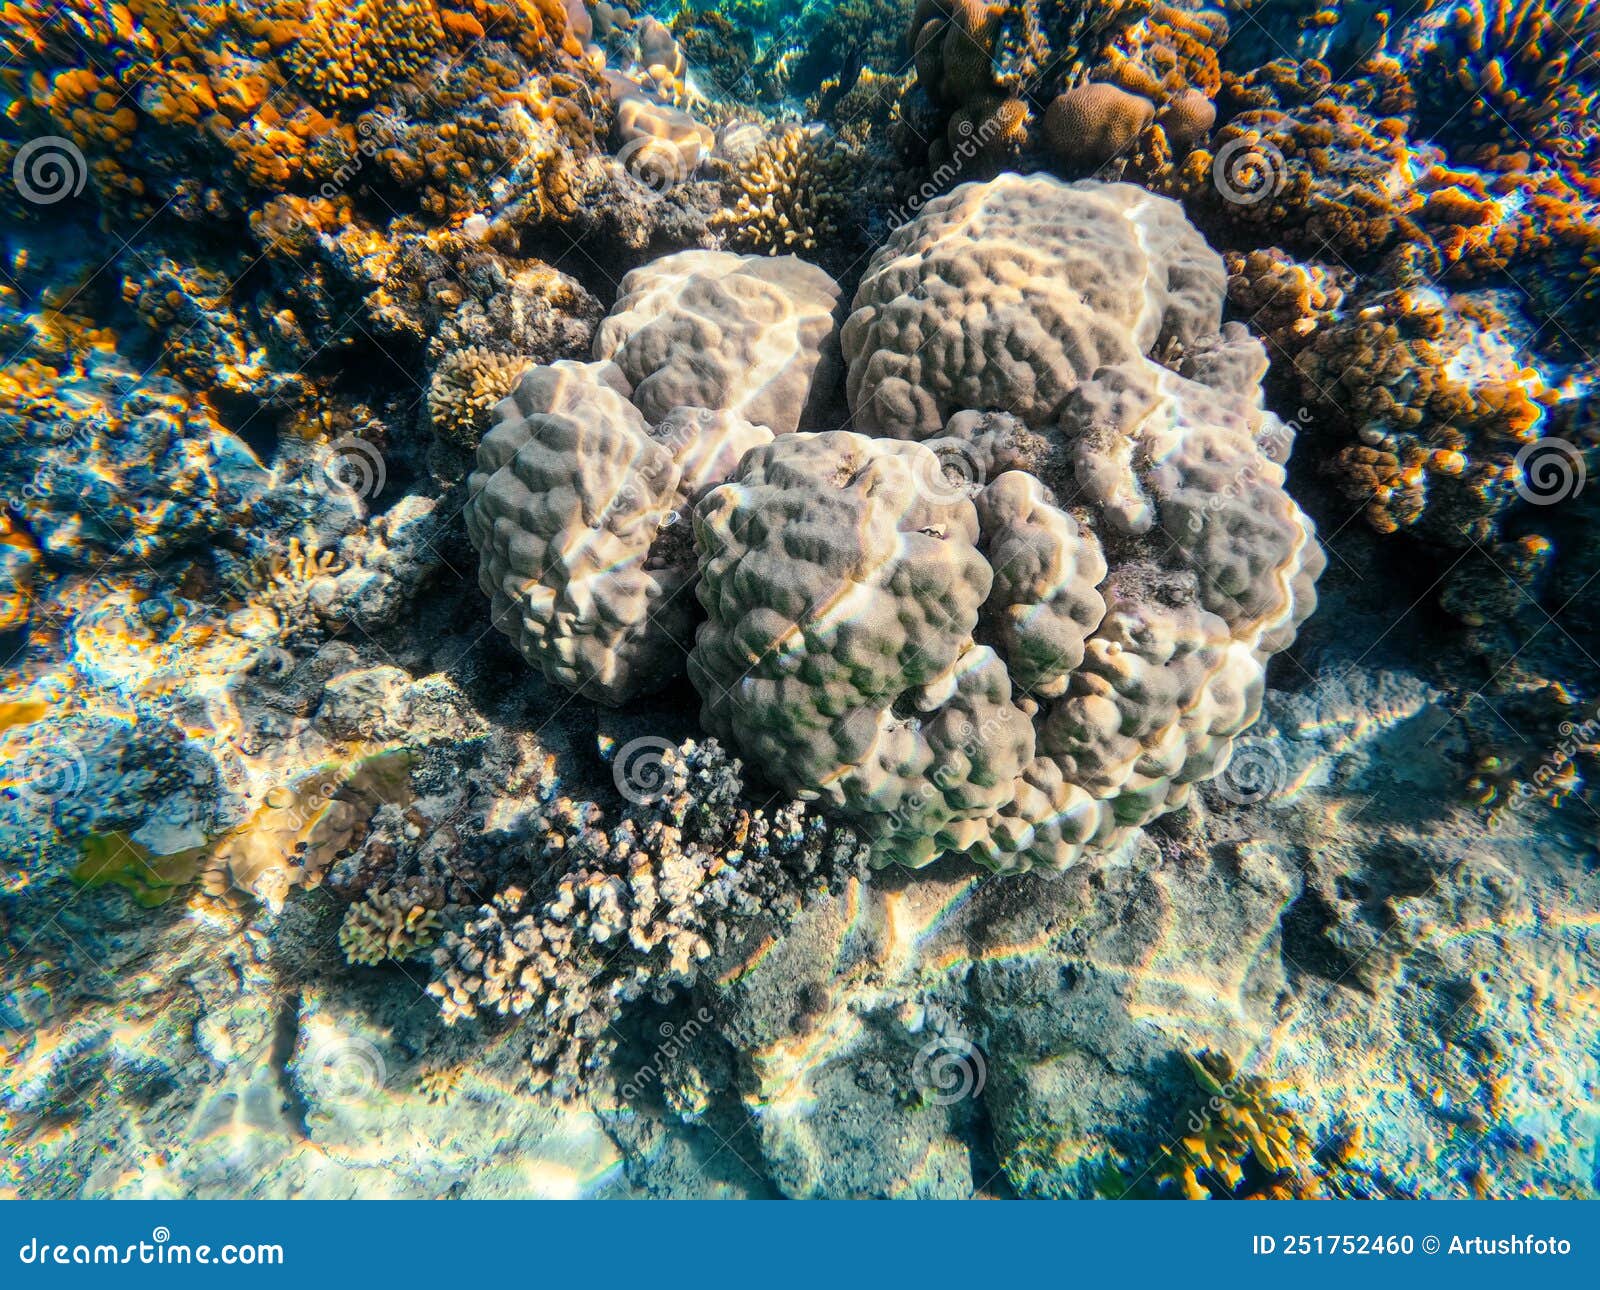 Coral Reef Garden in Red Sea, Marsa Alam Egypt Stock Photo - Image of ...